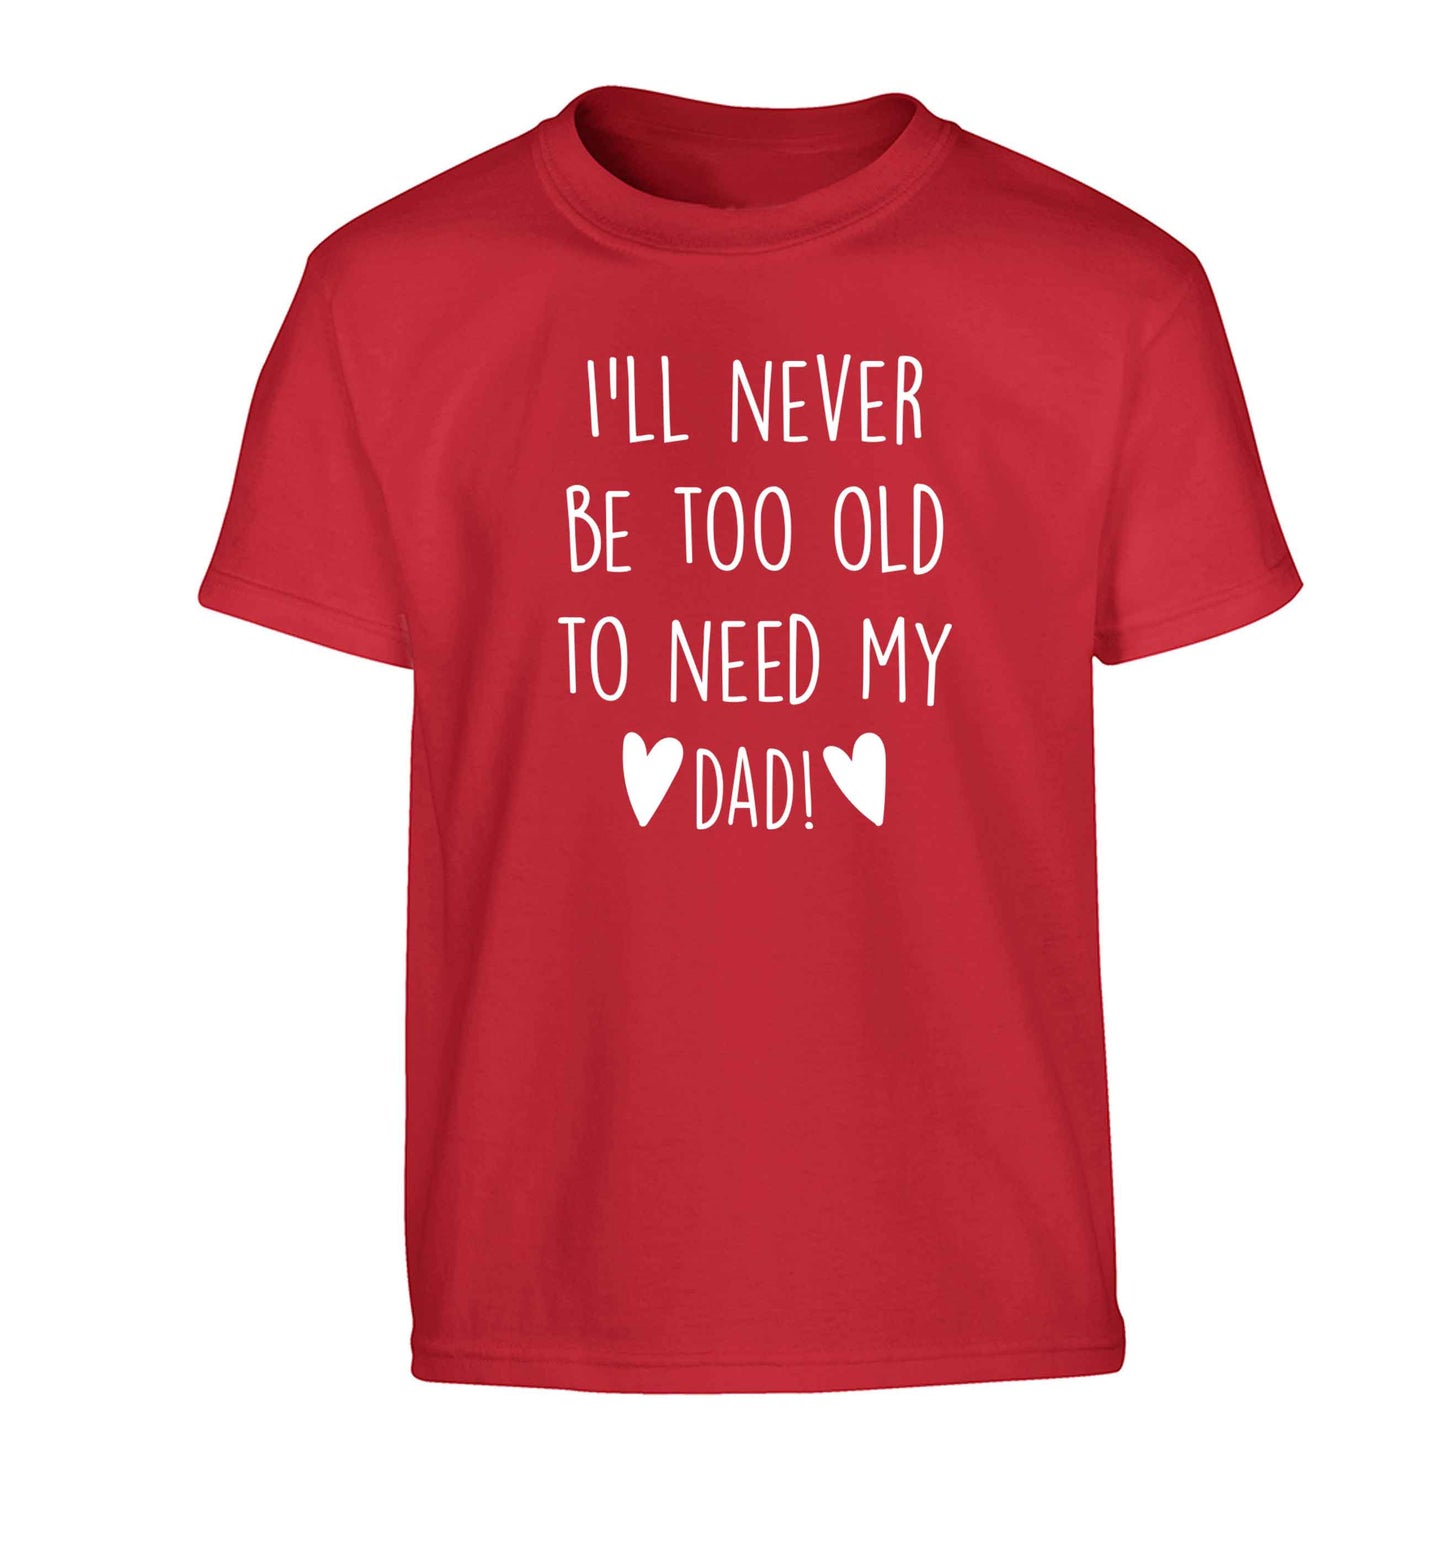 I'll never be too old to need my dad Children's red Tshirt 12-13 Years